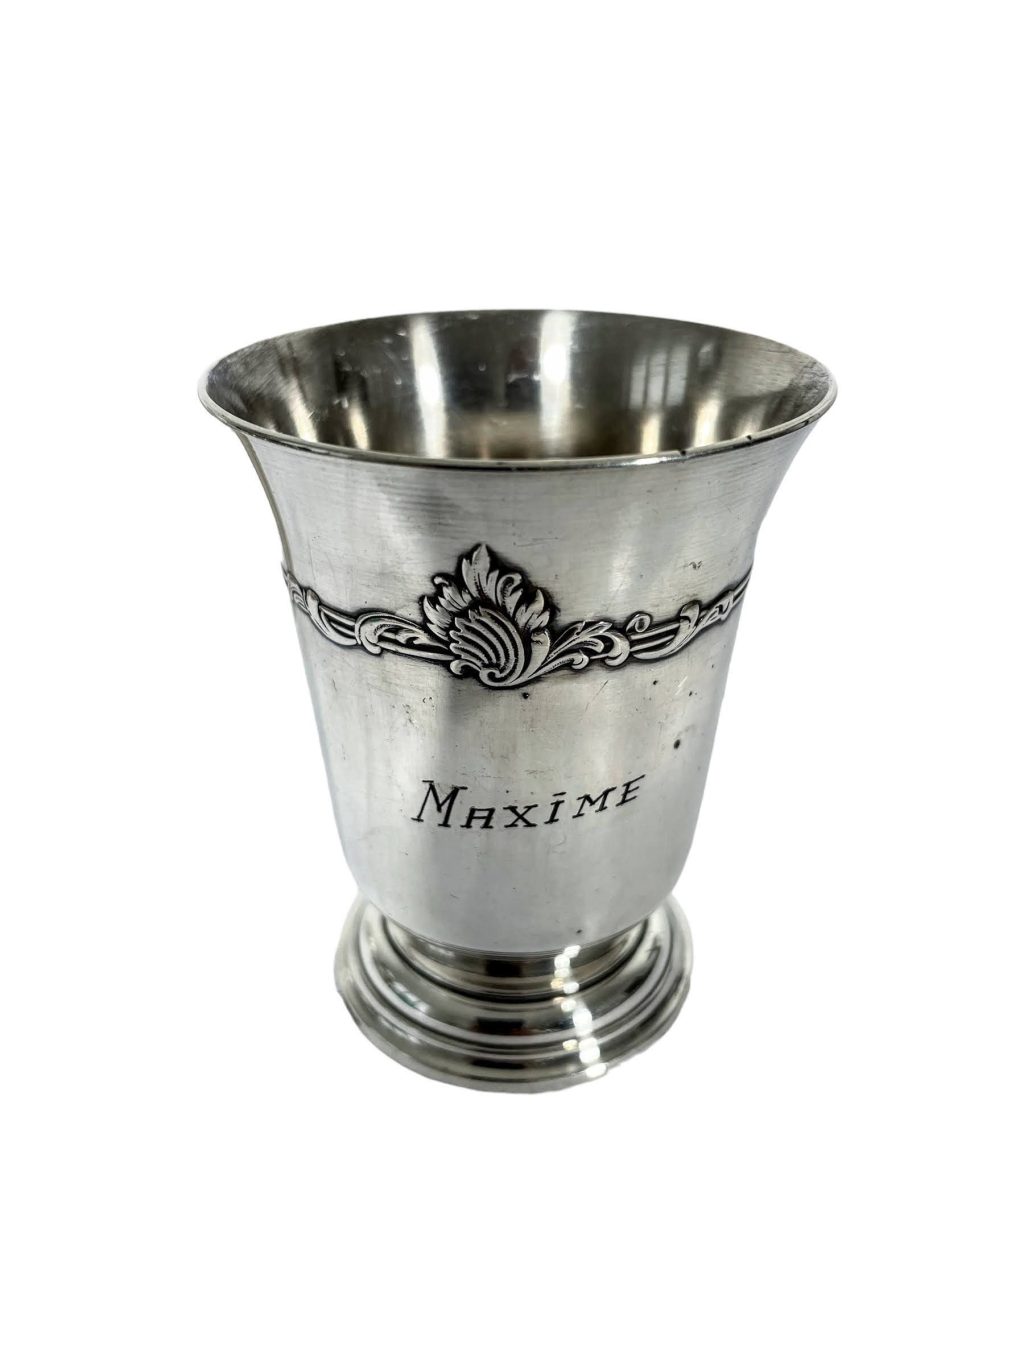 Vintage French Small Silver Metal Silver Plated Goblet Cup Beaker Container Display Drinking circa 1960-70’s